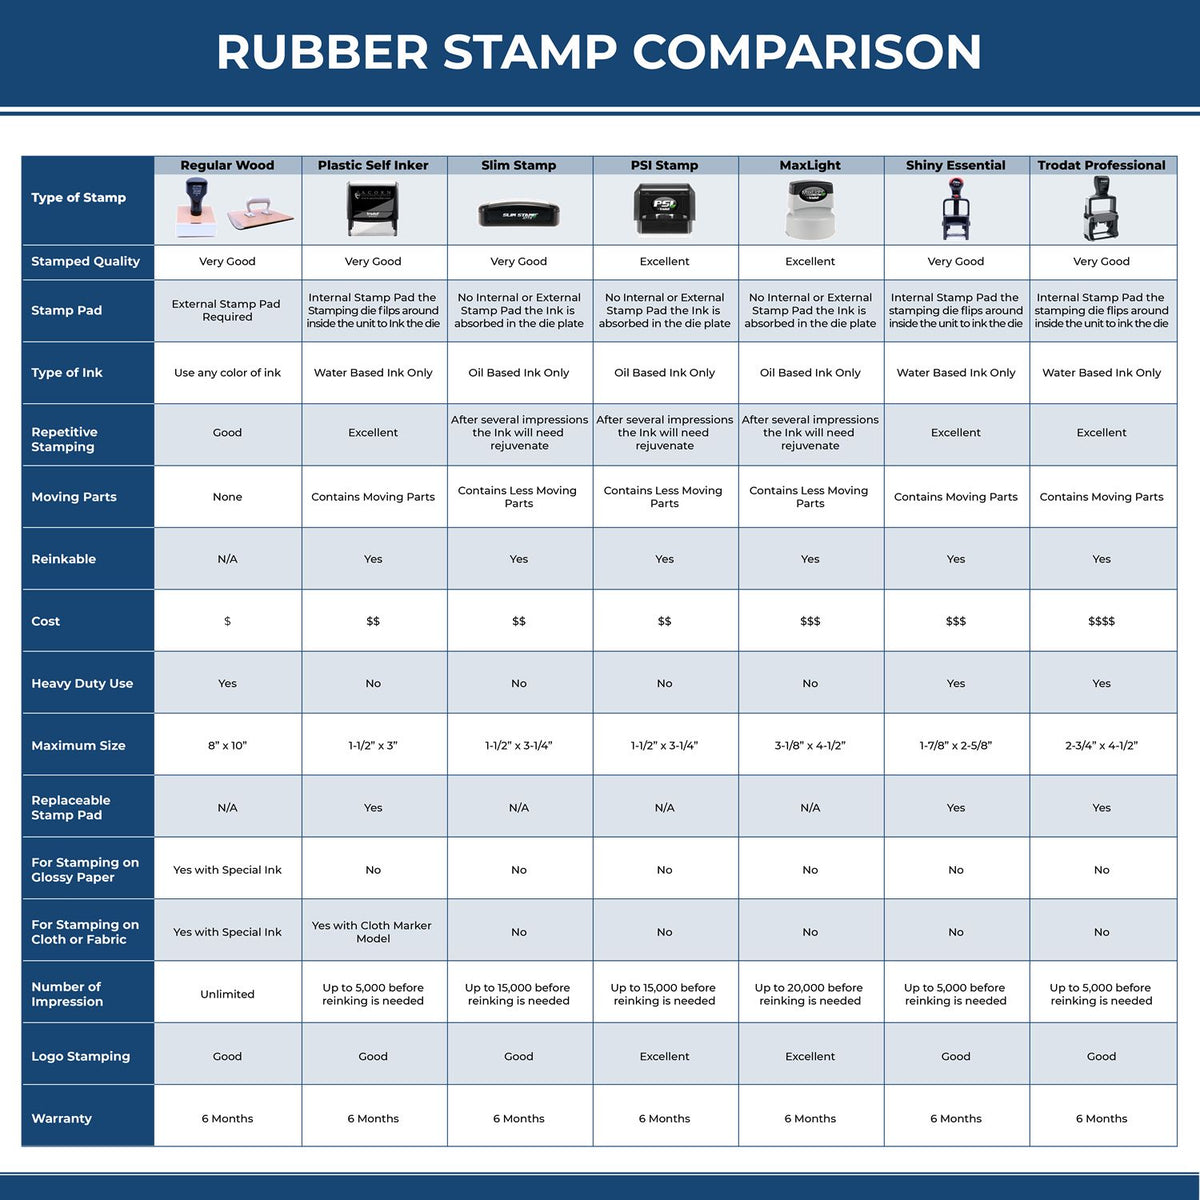 Large Stop Covid Patient Rubber Stamp 4995R Rubber Stamp Comparison